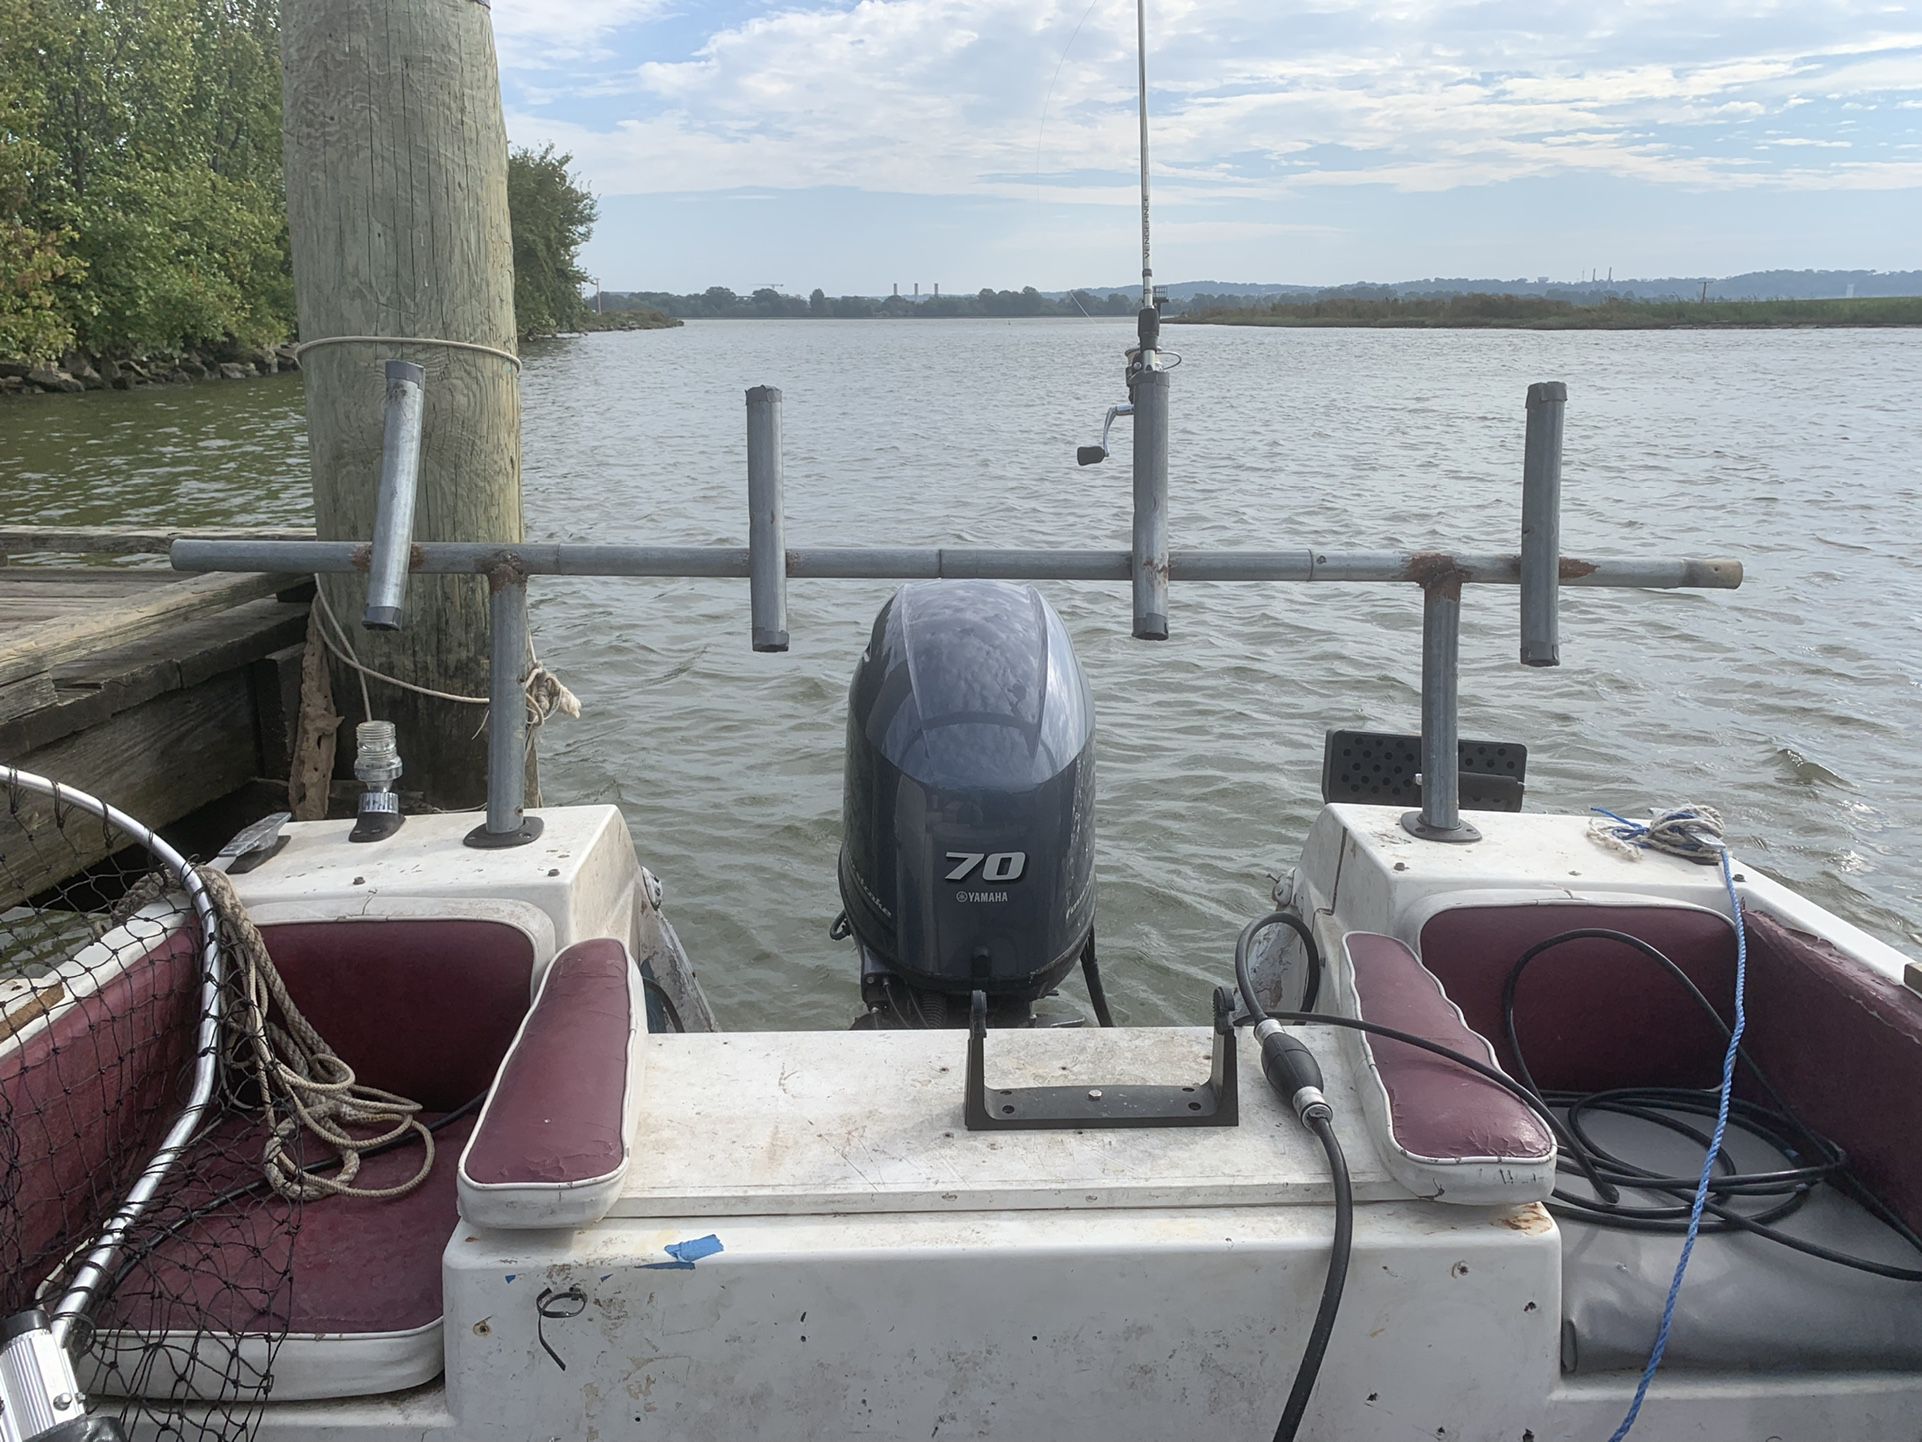 76” Galvanized 4 Rod Holders - Welded for Crappies, Catfish And Rockfish For Boat